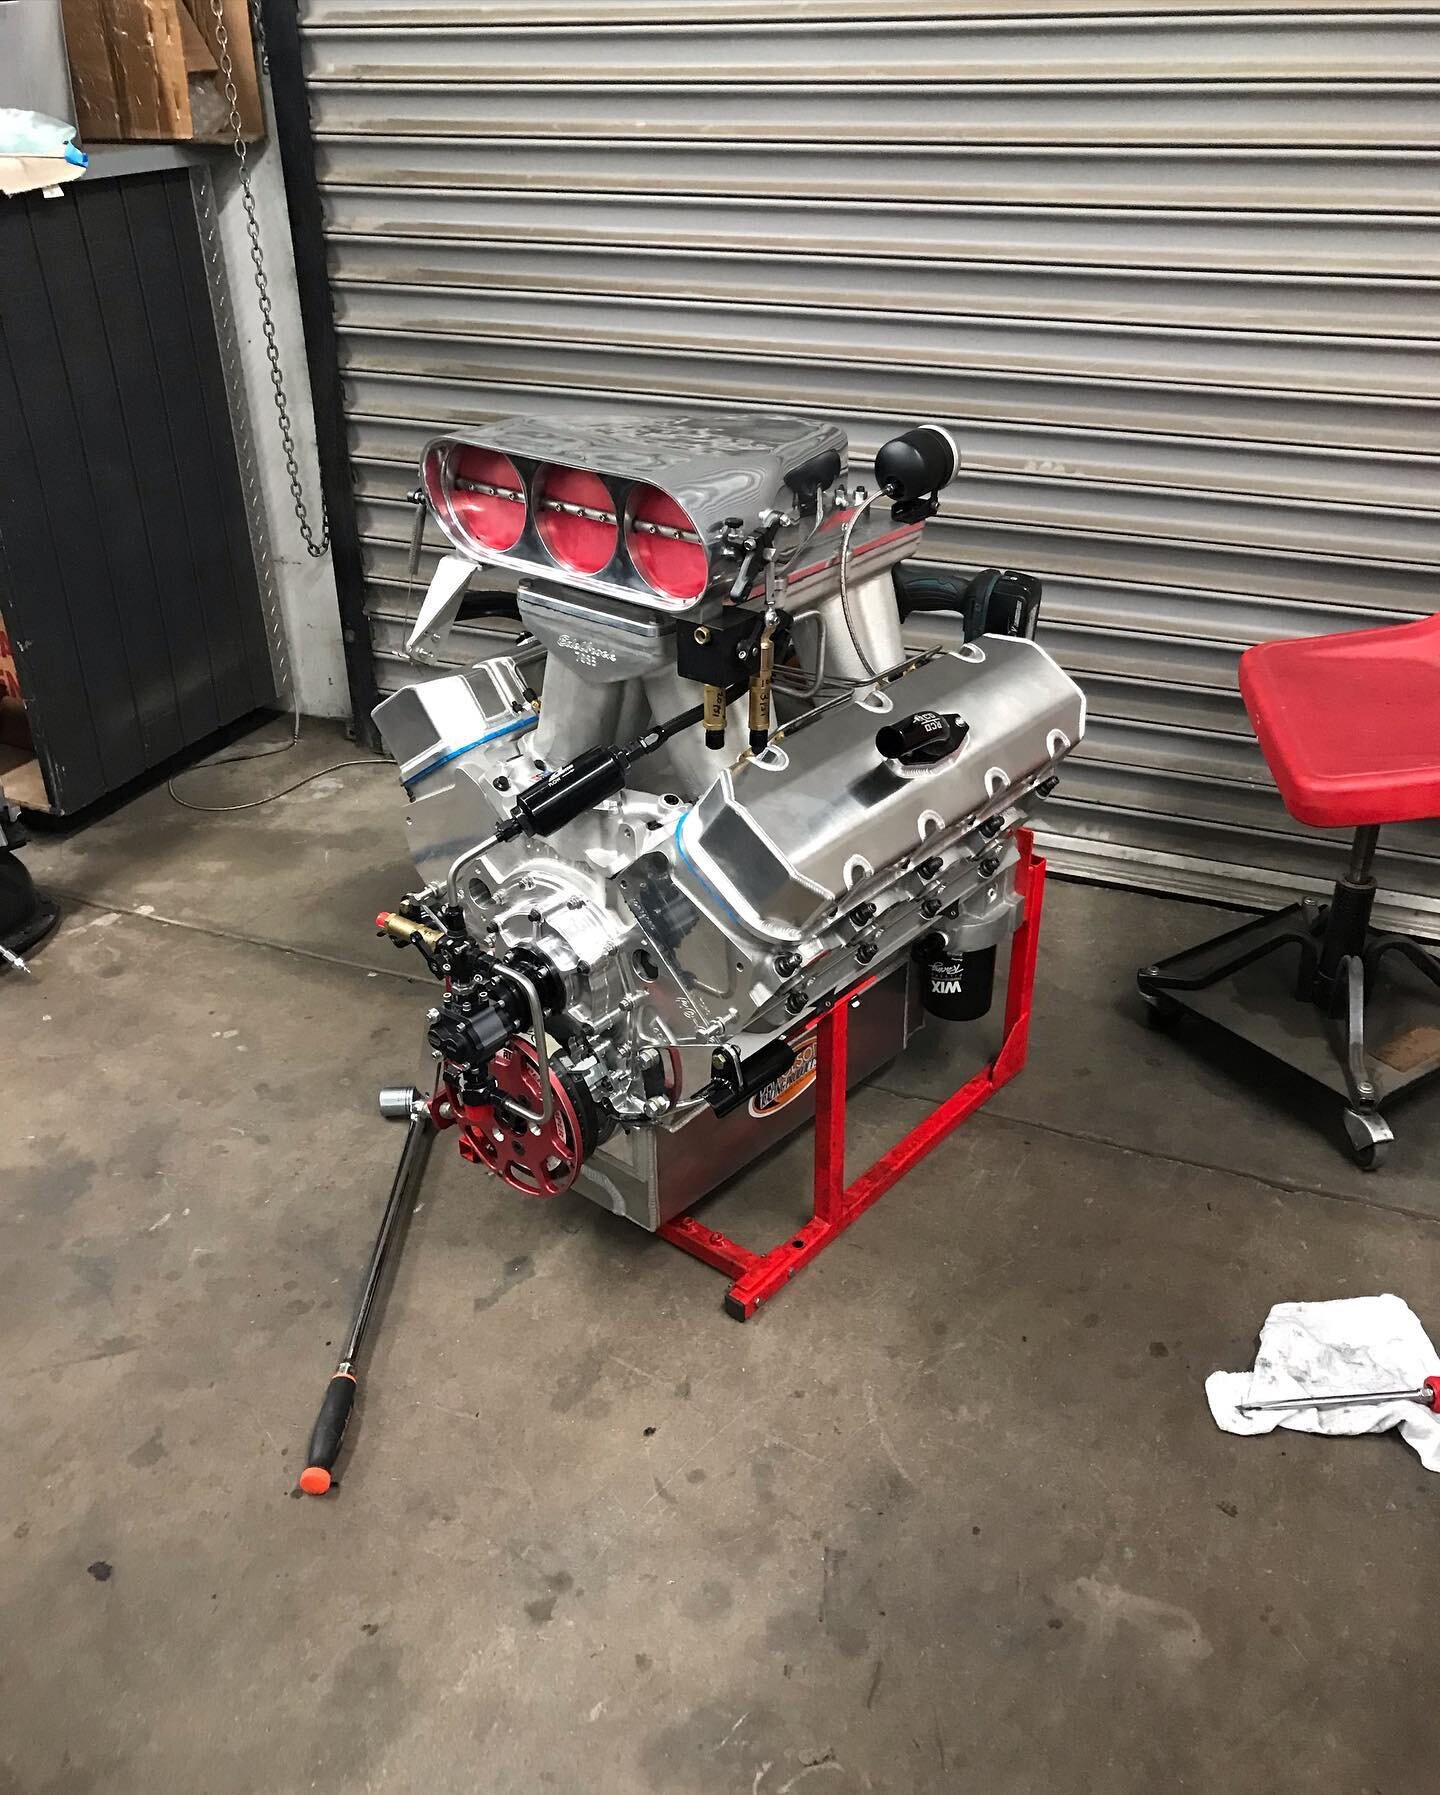 We&rsquo;ve even had some time to work on our own toys. Got our new Donovan big block back from @motormachine 555&rdquo; worth of alcohol injected 16:1 compression party machine.